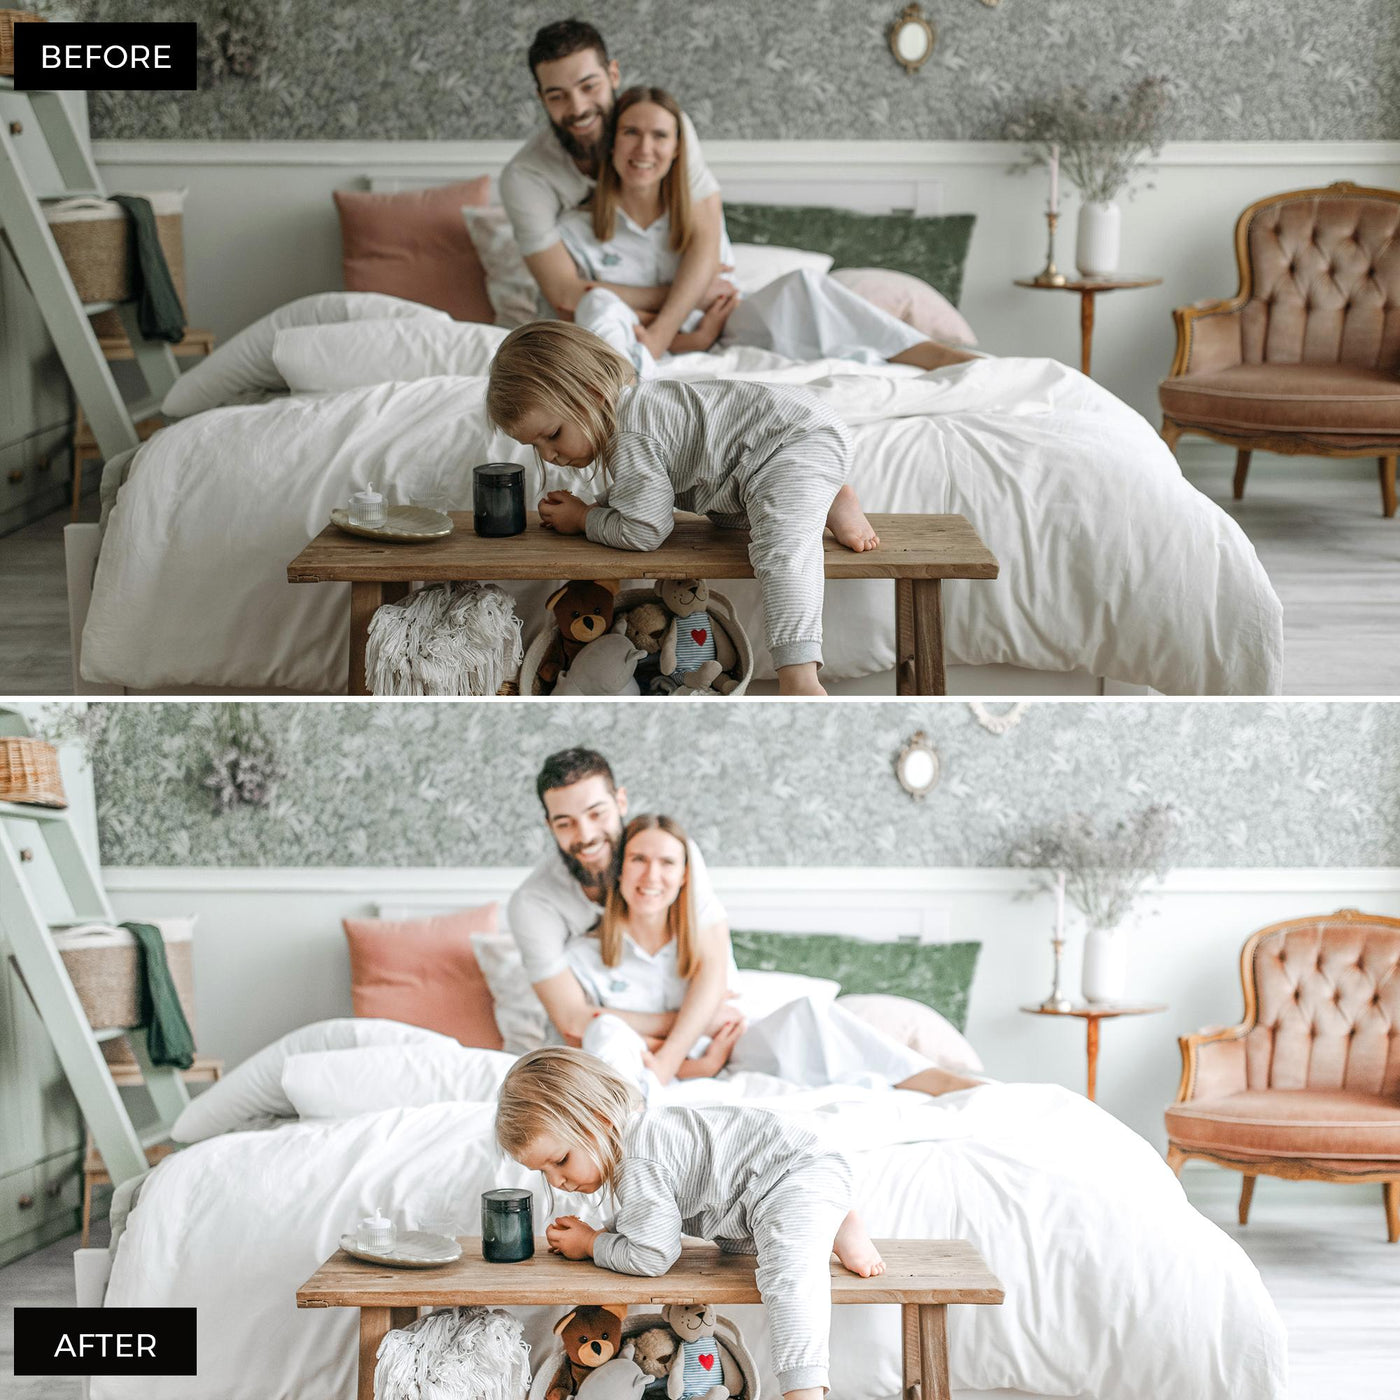 Family Lightroom Presets Collection